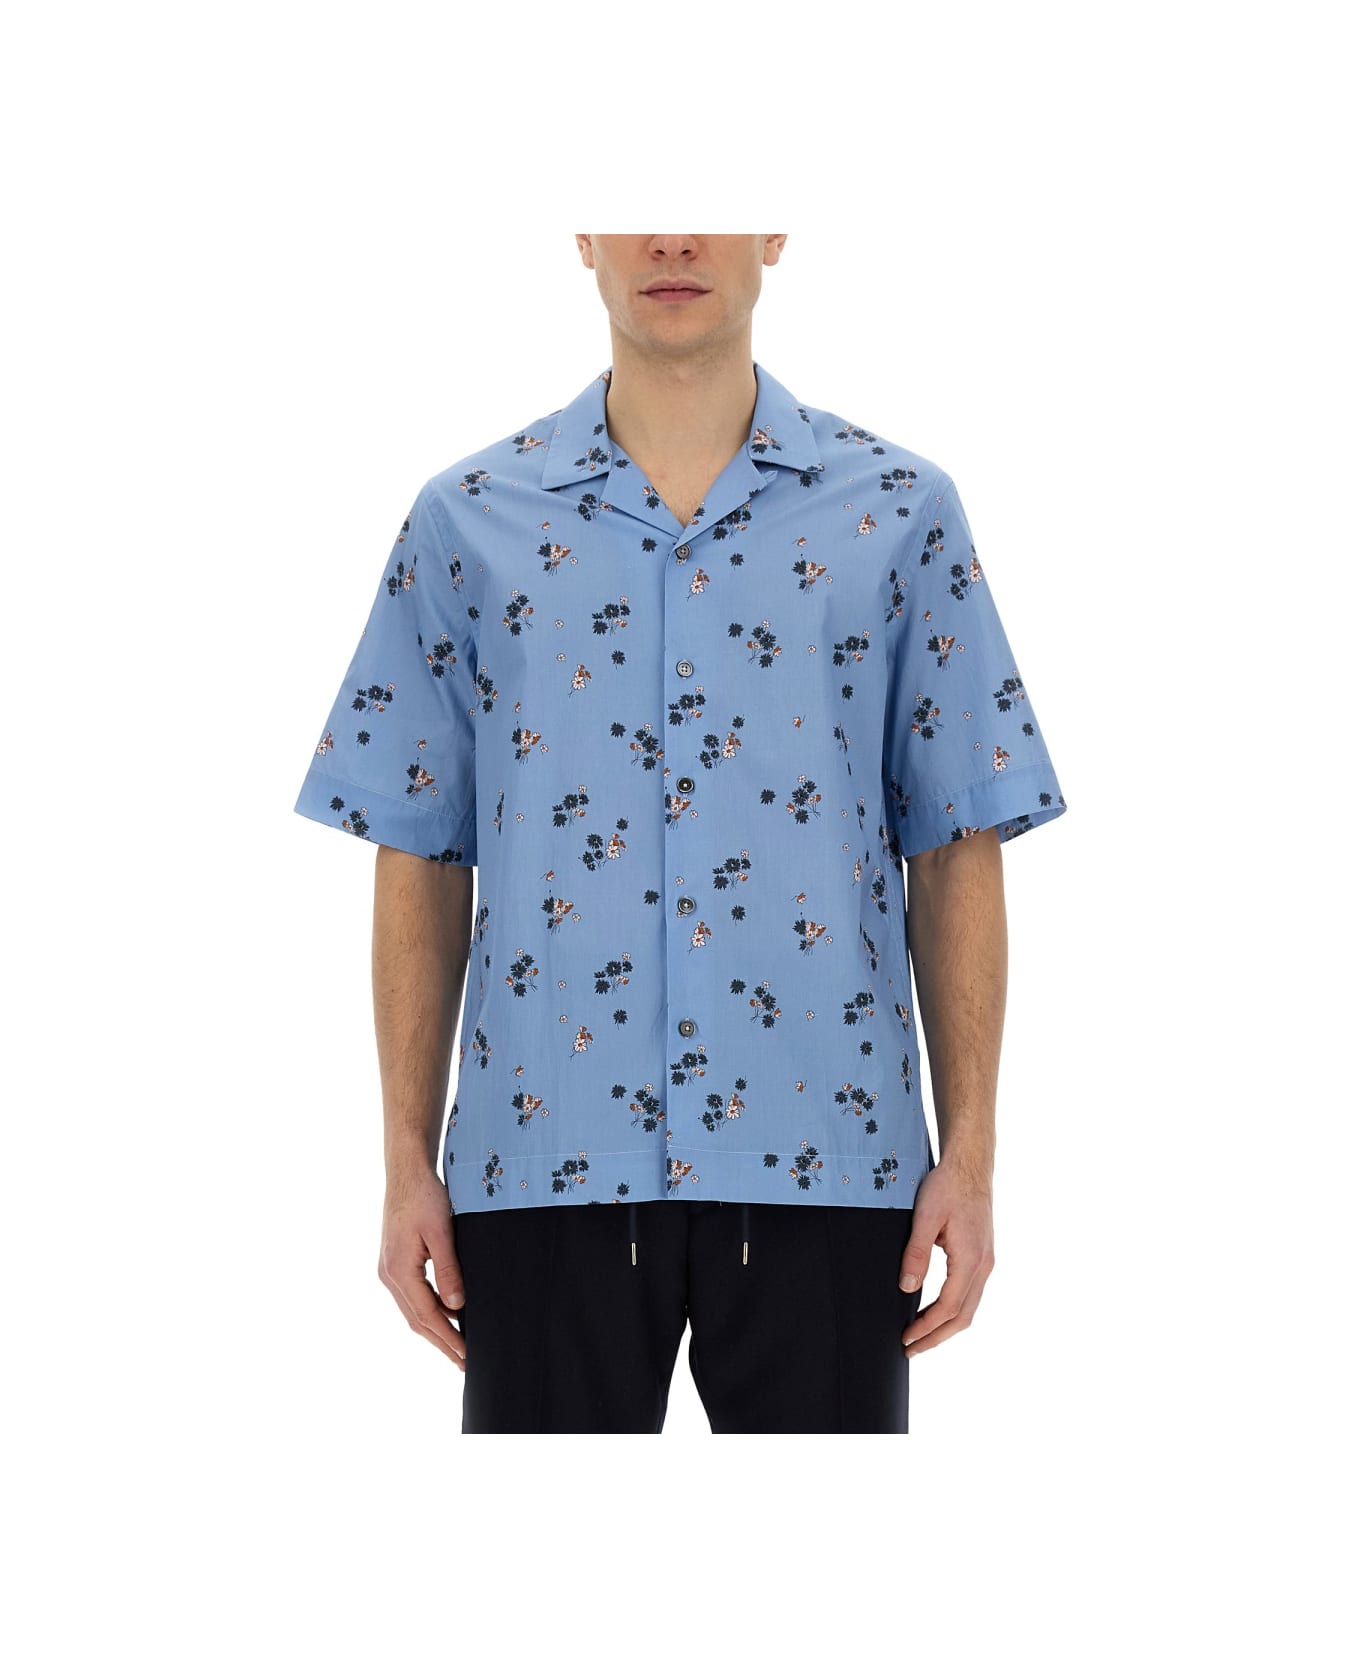 Paul Smith Shirt With Floral Pattern - AZURE